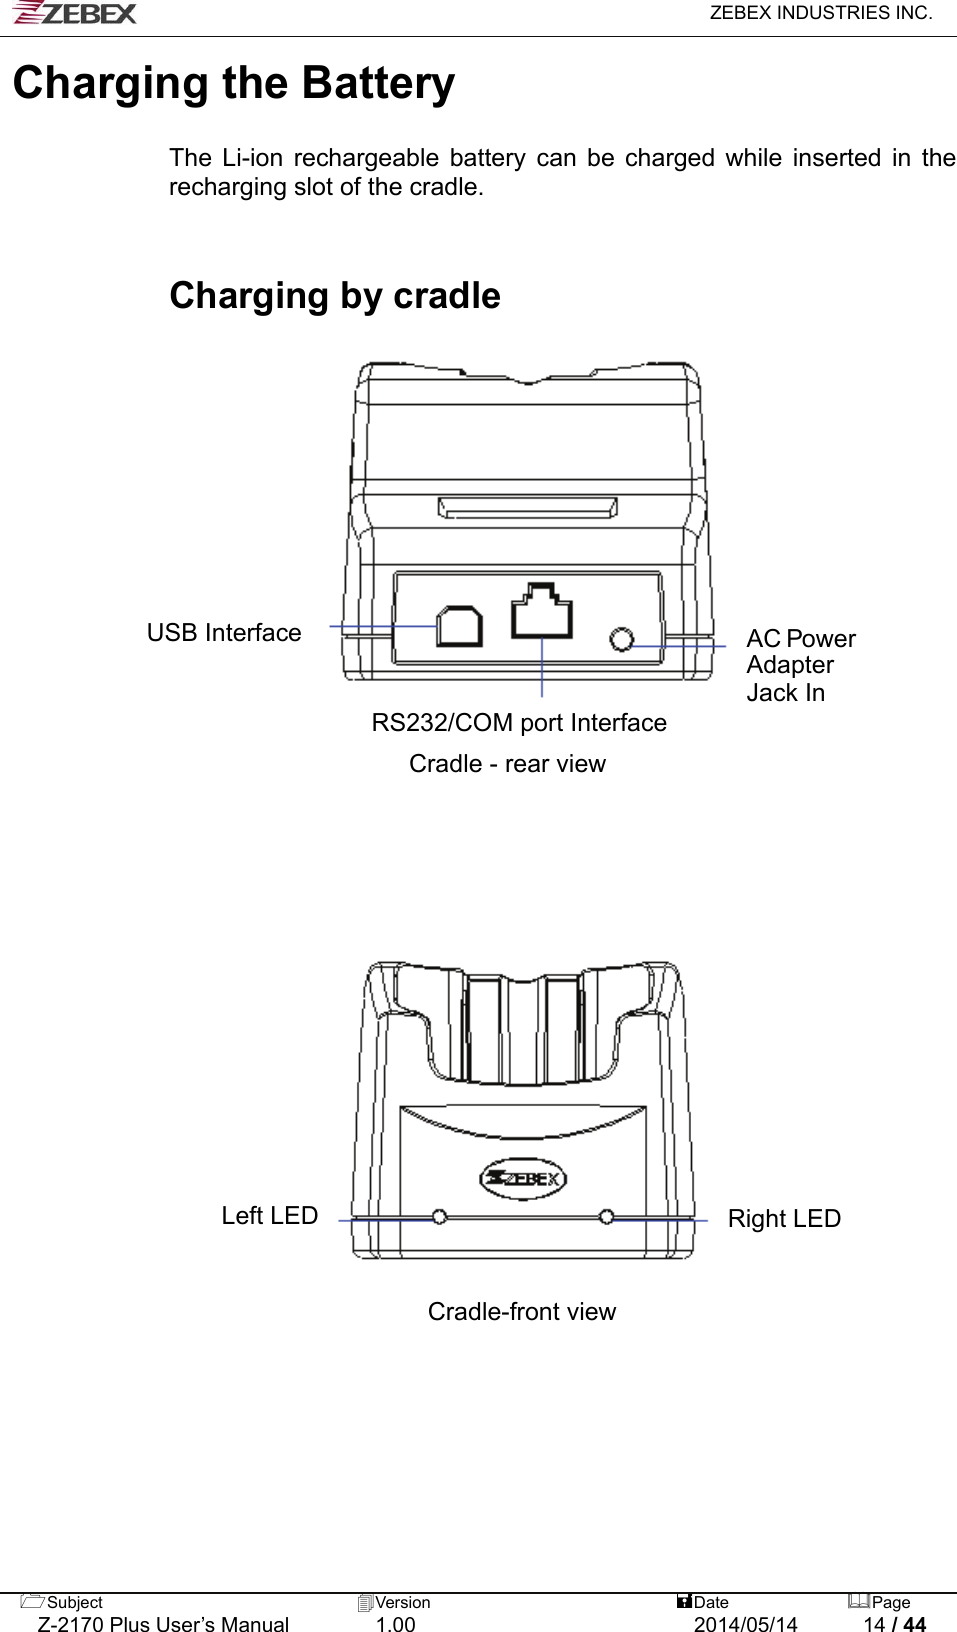   ZEBEX INDUSTRIES INC.  Subject  Version   DatePage   Z-2170 Plus User’s Manual  1.00  2014/05/14  14 / 44 Charging the Battery    The Li-ion rechargeable battery can be charged while inserted in the recharging slot of the cradle.   Charging by cradle                                      AC Power Adapter Jack In USB Interface  RS232/COM port Interface Cradle - rear view Right LED Left LED Cradle-front view 